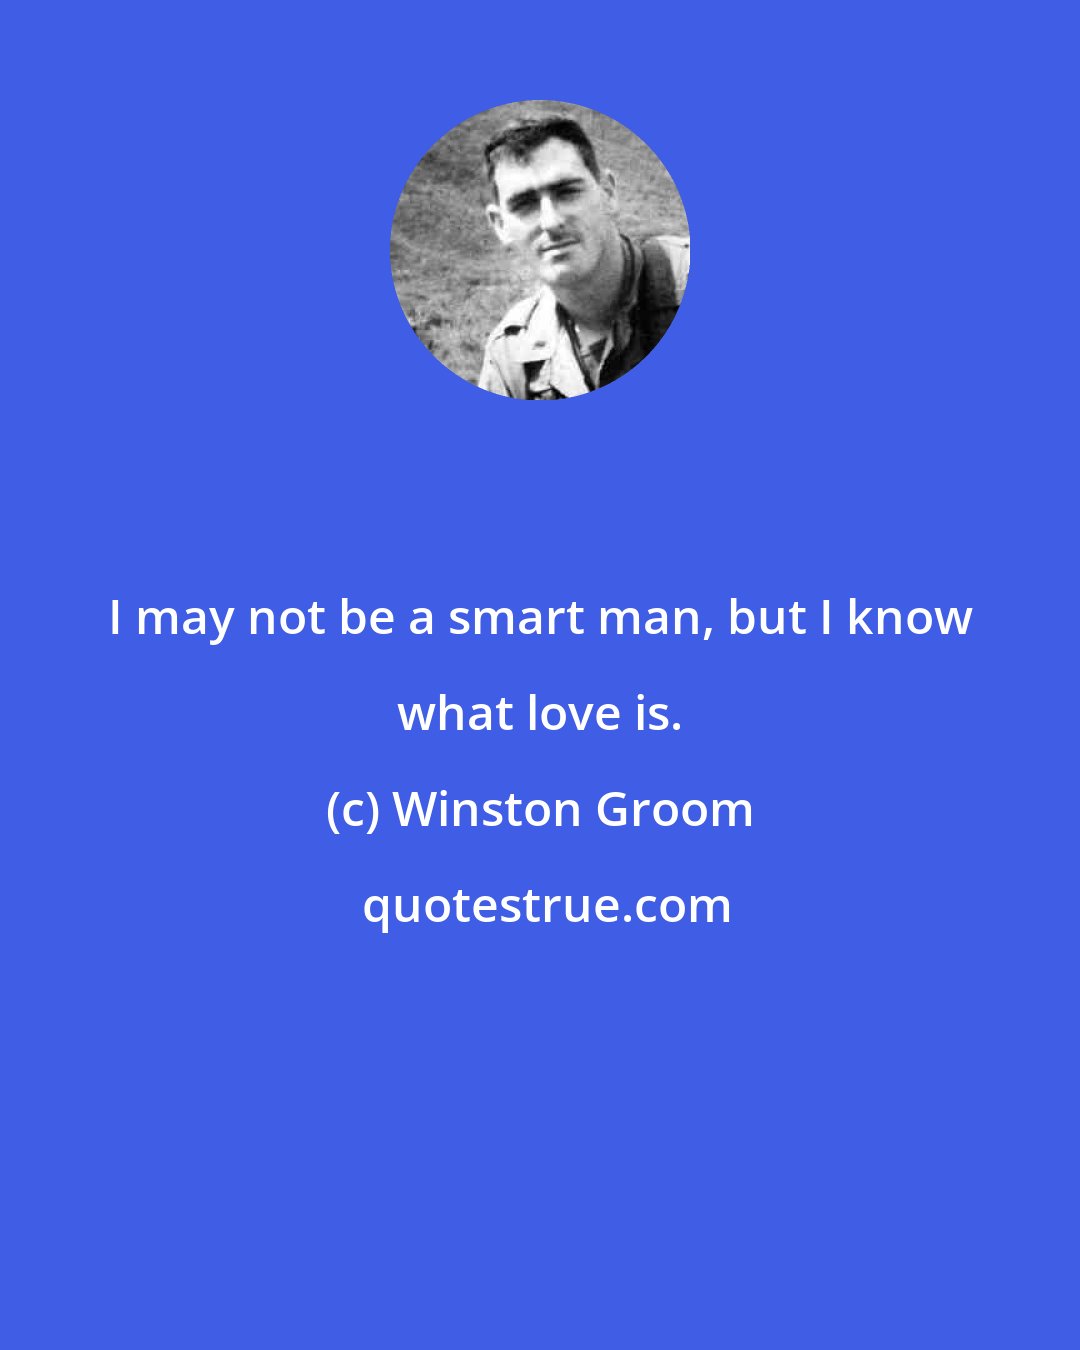 Winston Groom: I may not be a smart man, but I know what love is.